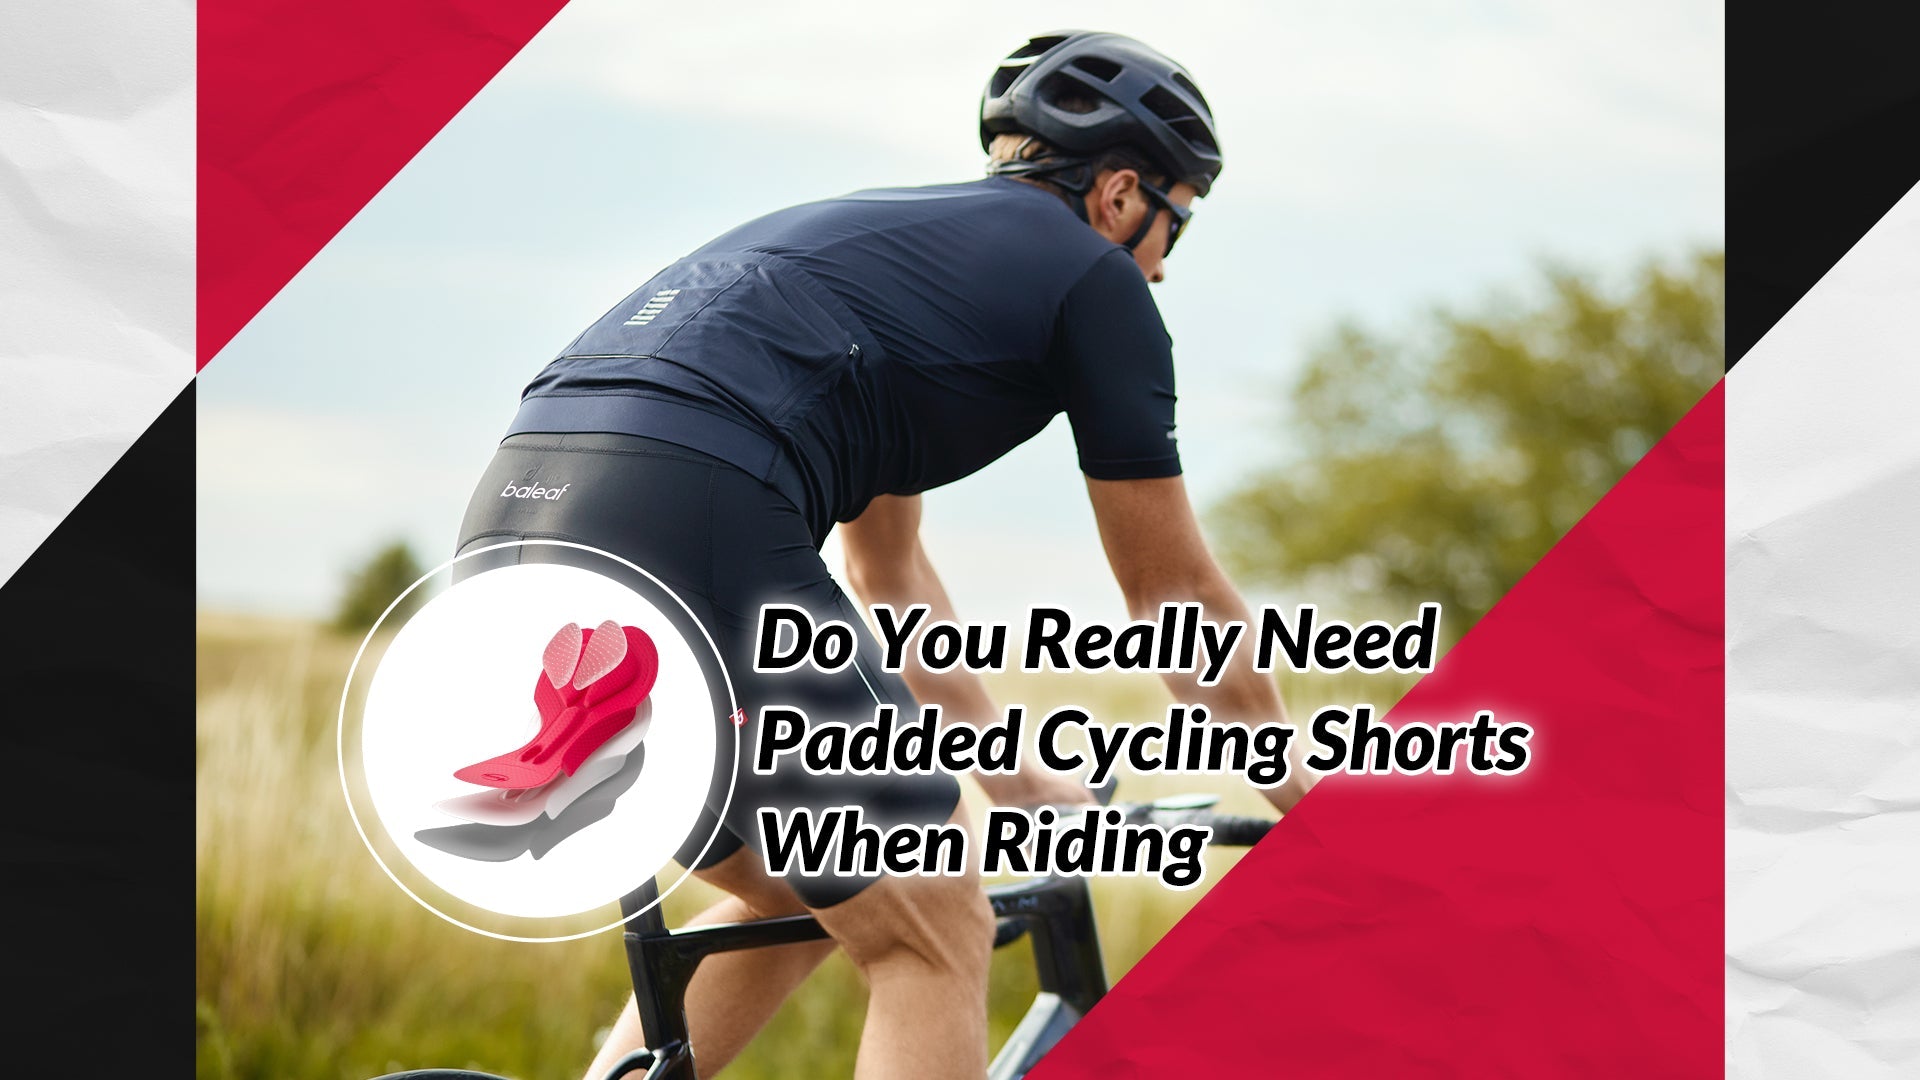 Do You Really Need Padded Cycling Shorts When Riding?